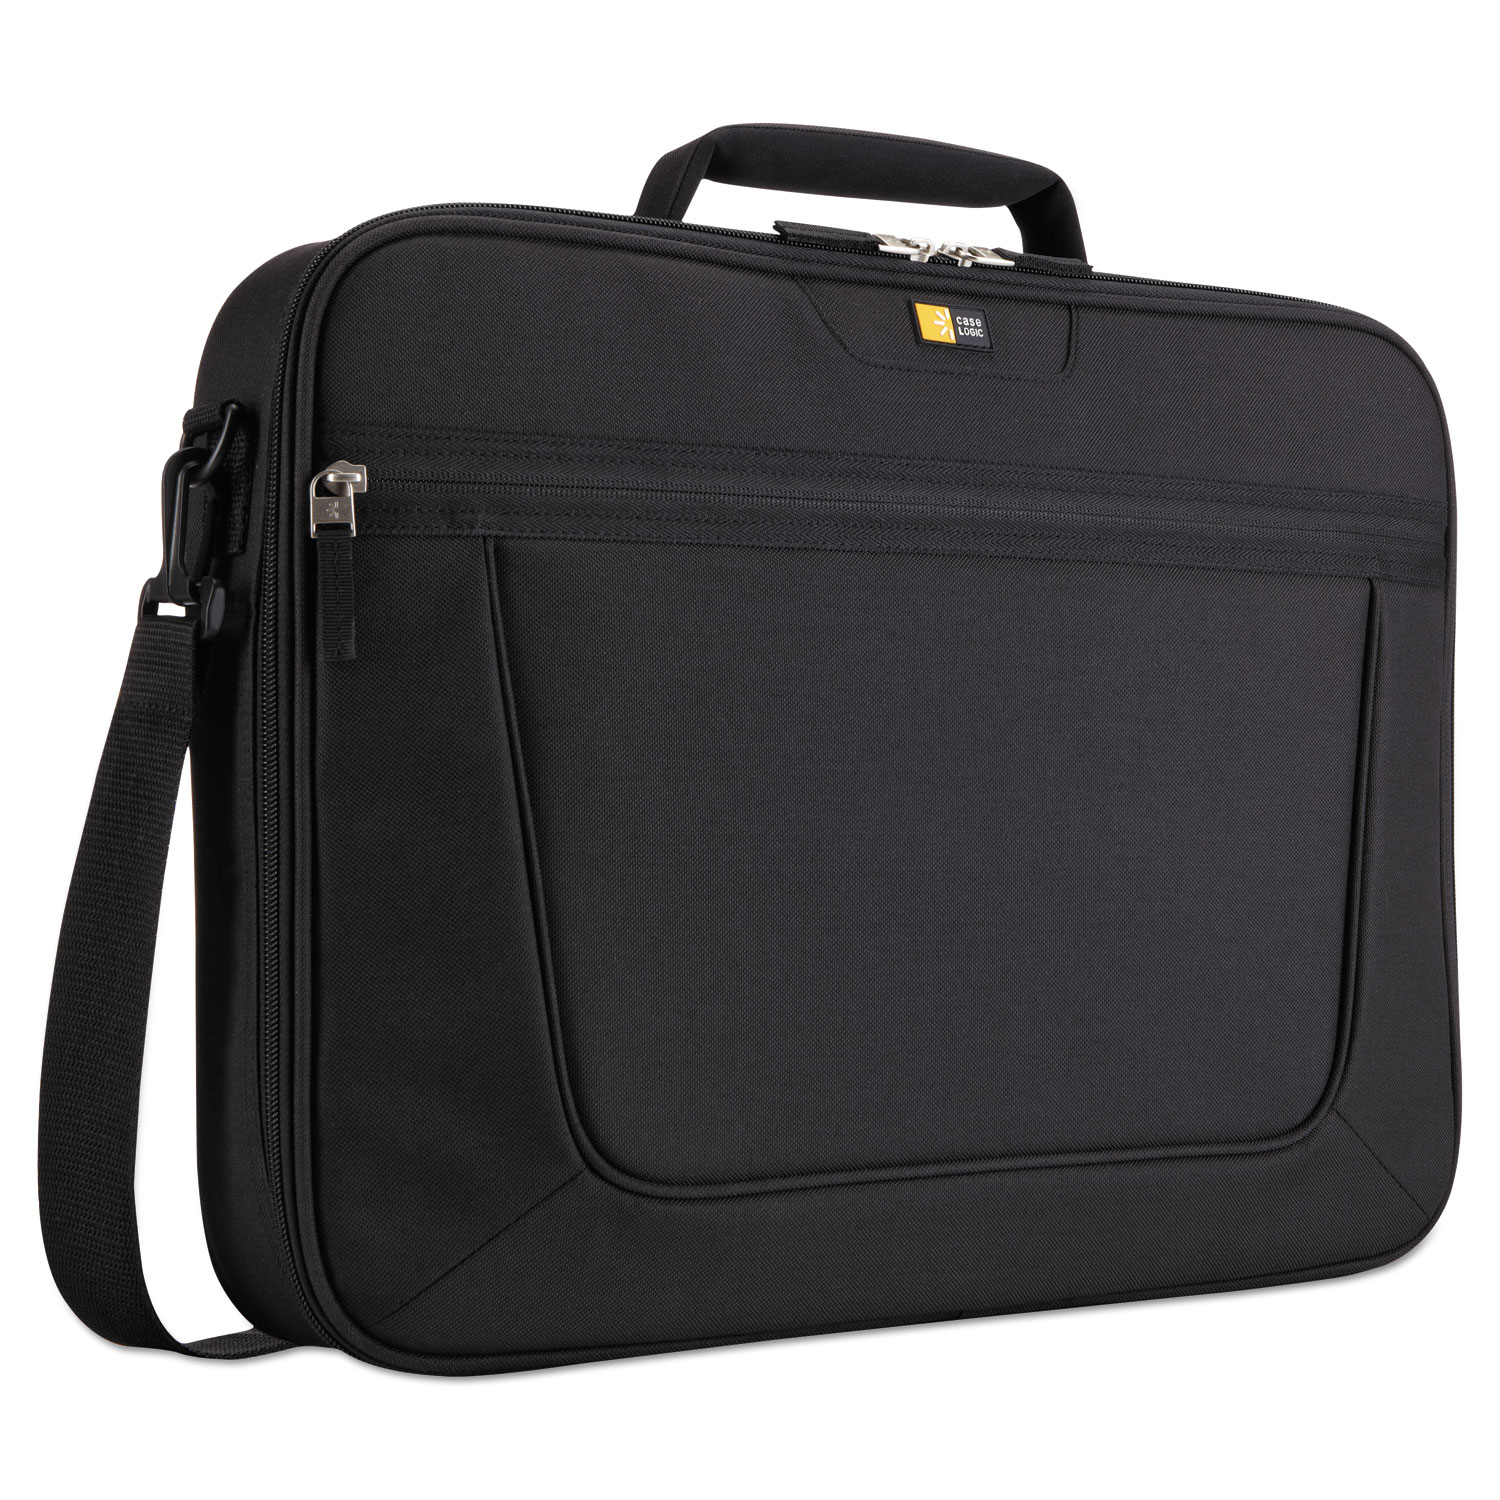 Primary 17" Laptop Clamshell Case, 18.5" x 3.5" x 15.7", Black